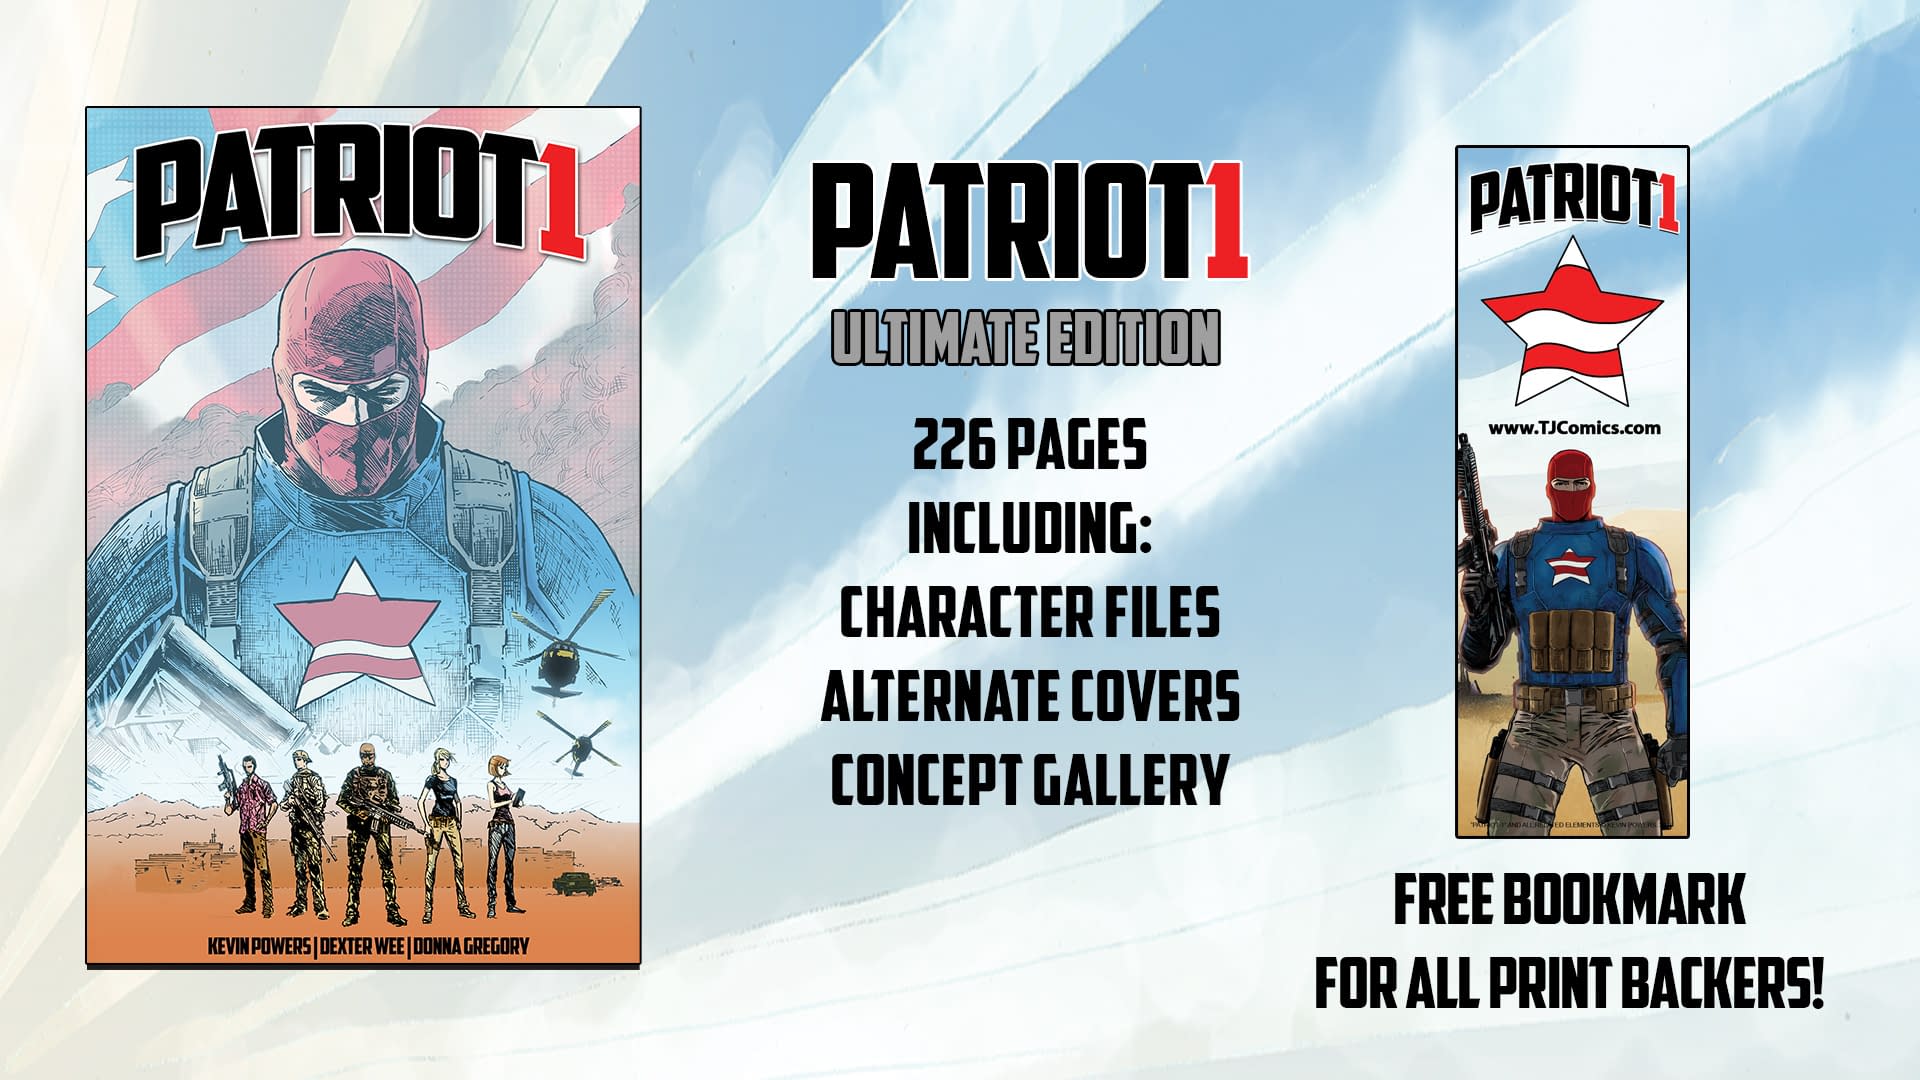 Patriot-1 is the Book America -- and the World -- Needs Right Now